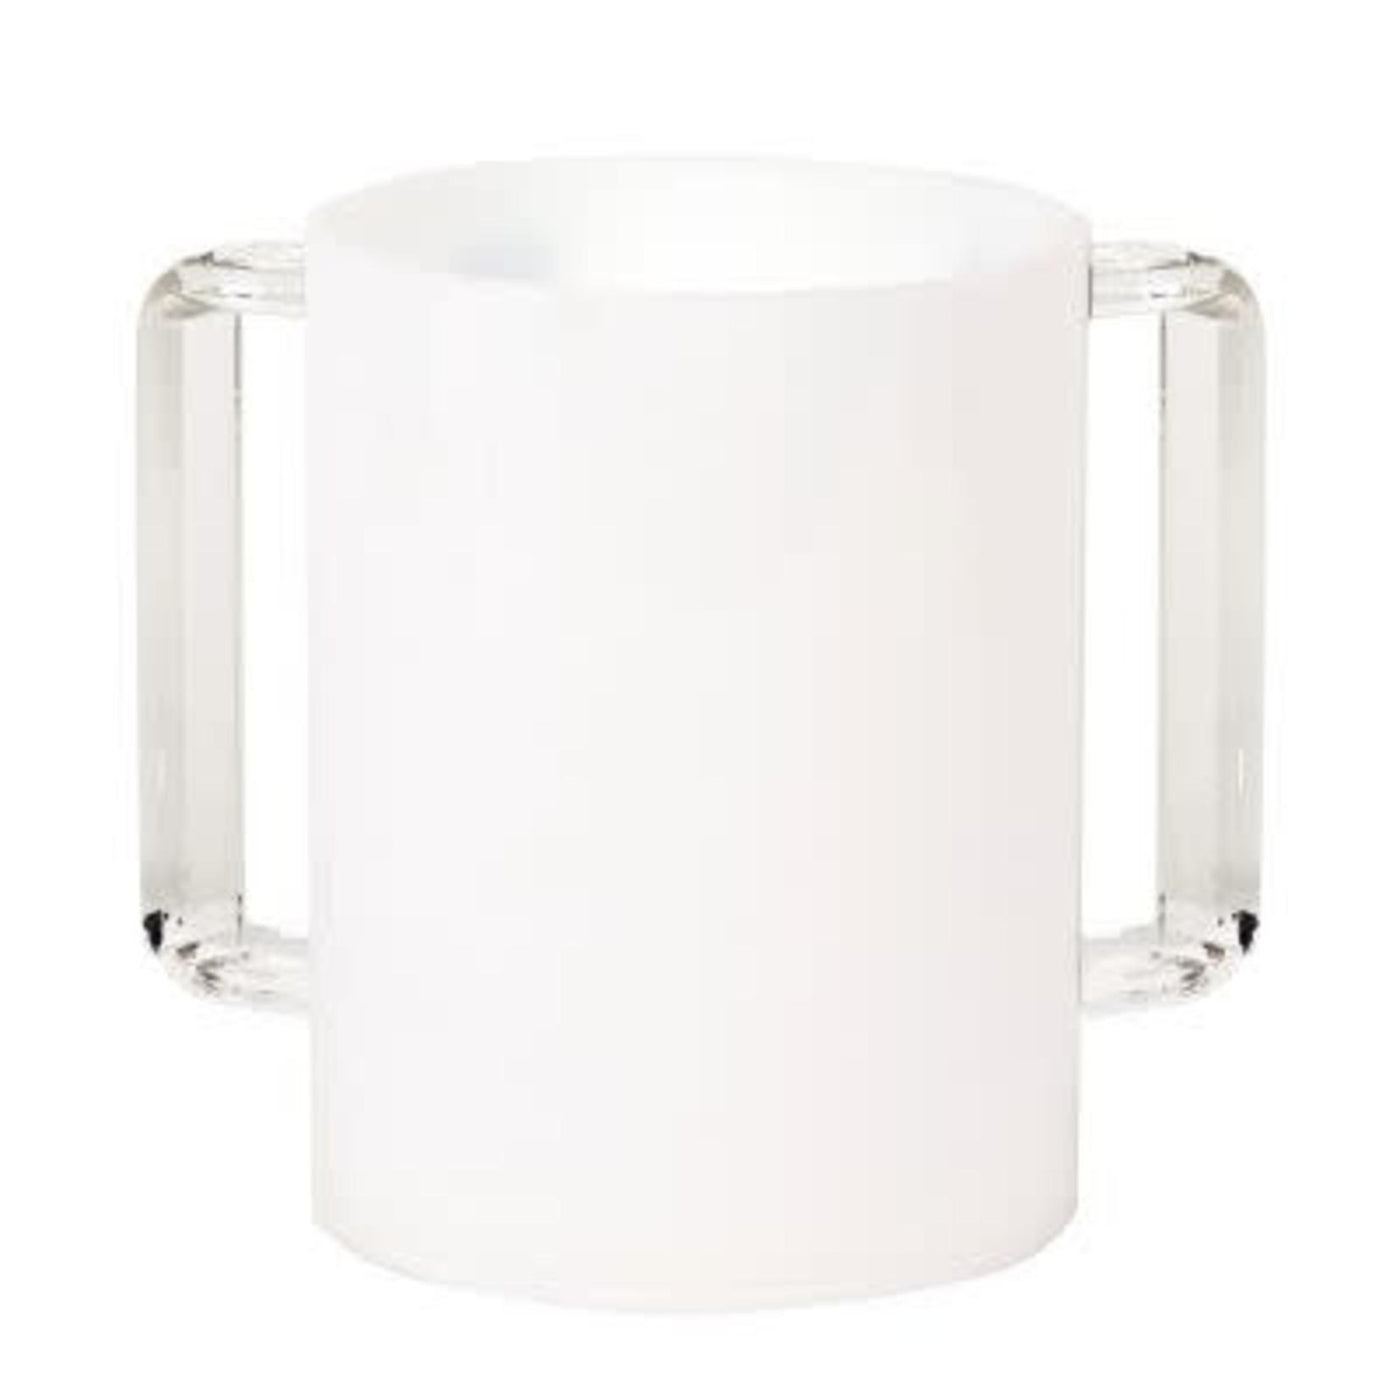 Acrylic White Wash Cup With Clear Handles (1 Count)